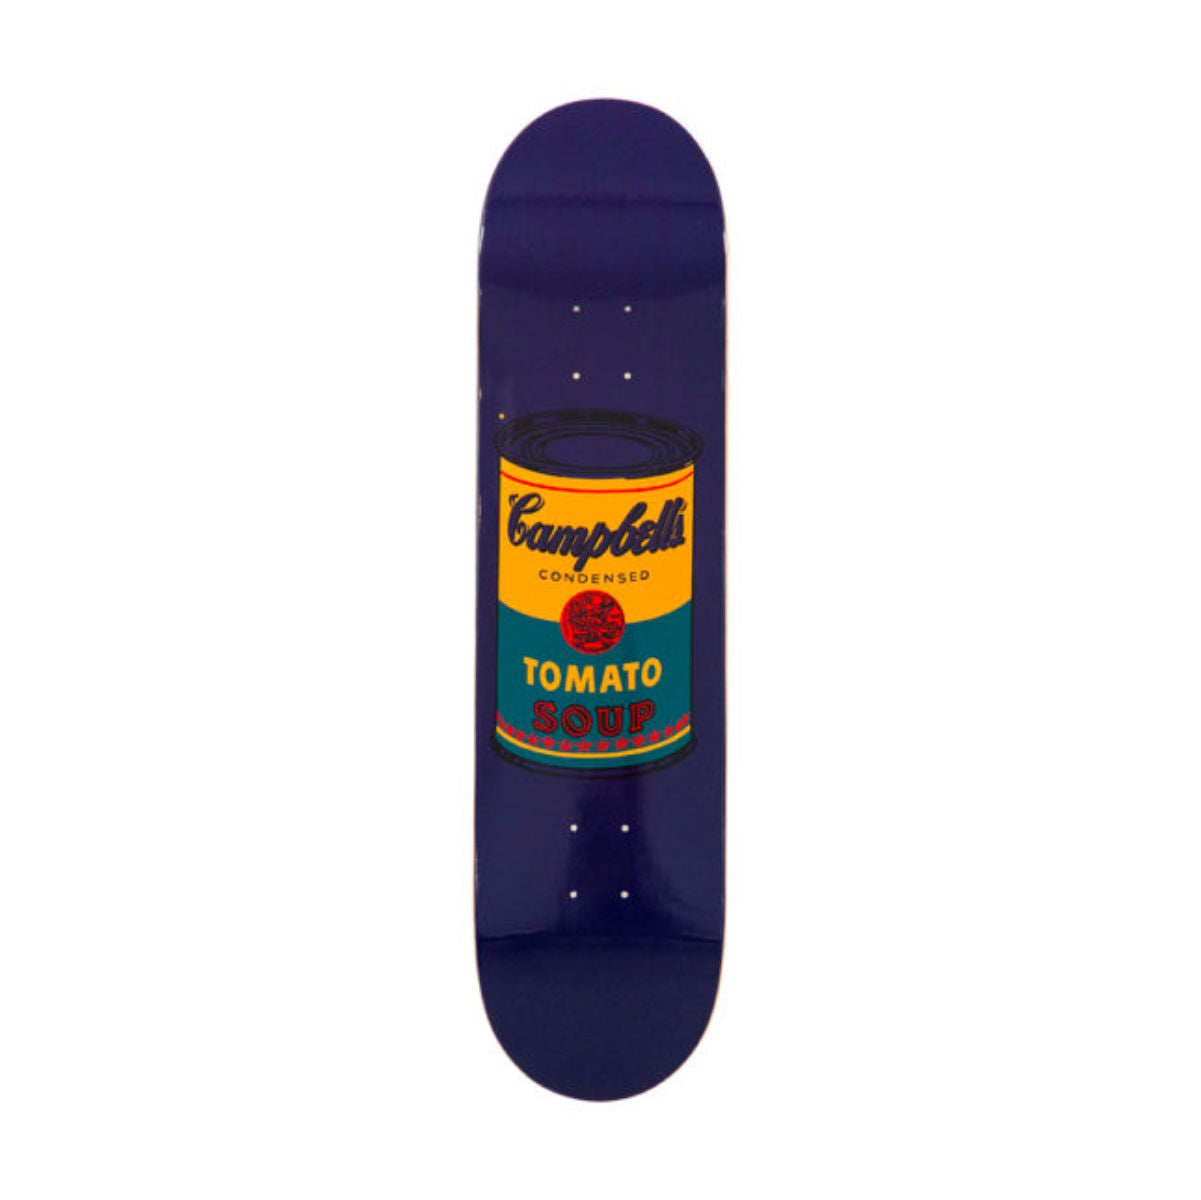 The Skateroom skateboard, Andy Warhol Colored Campbell's Soup teal